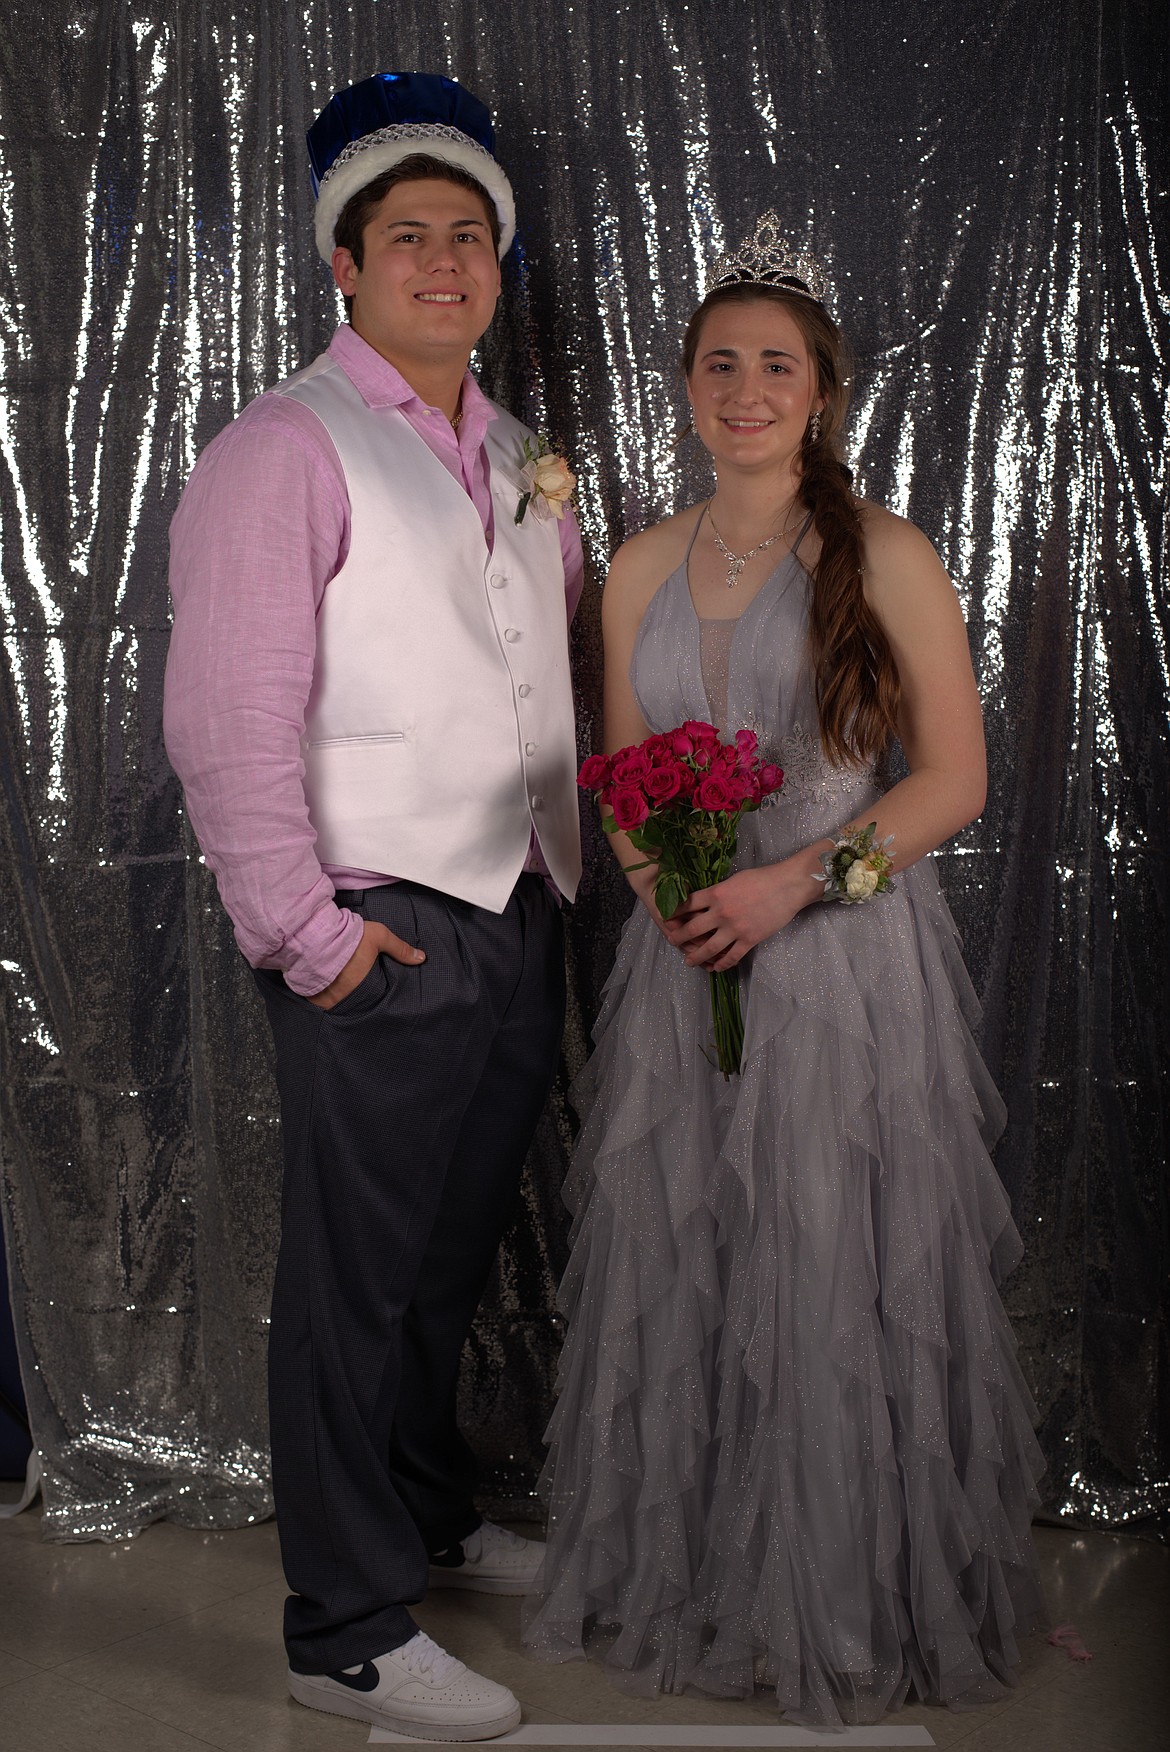 Superior Prom Queen Lanie Crabb and King Chandon Vulles.